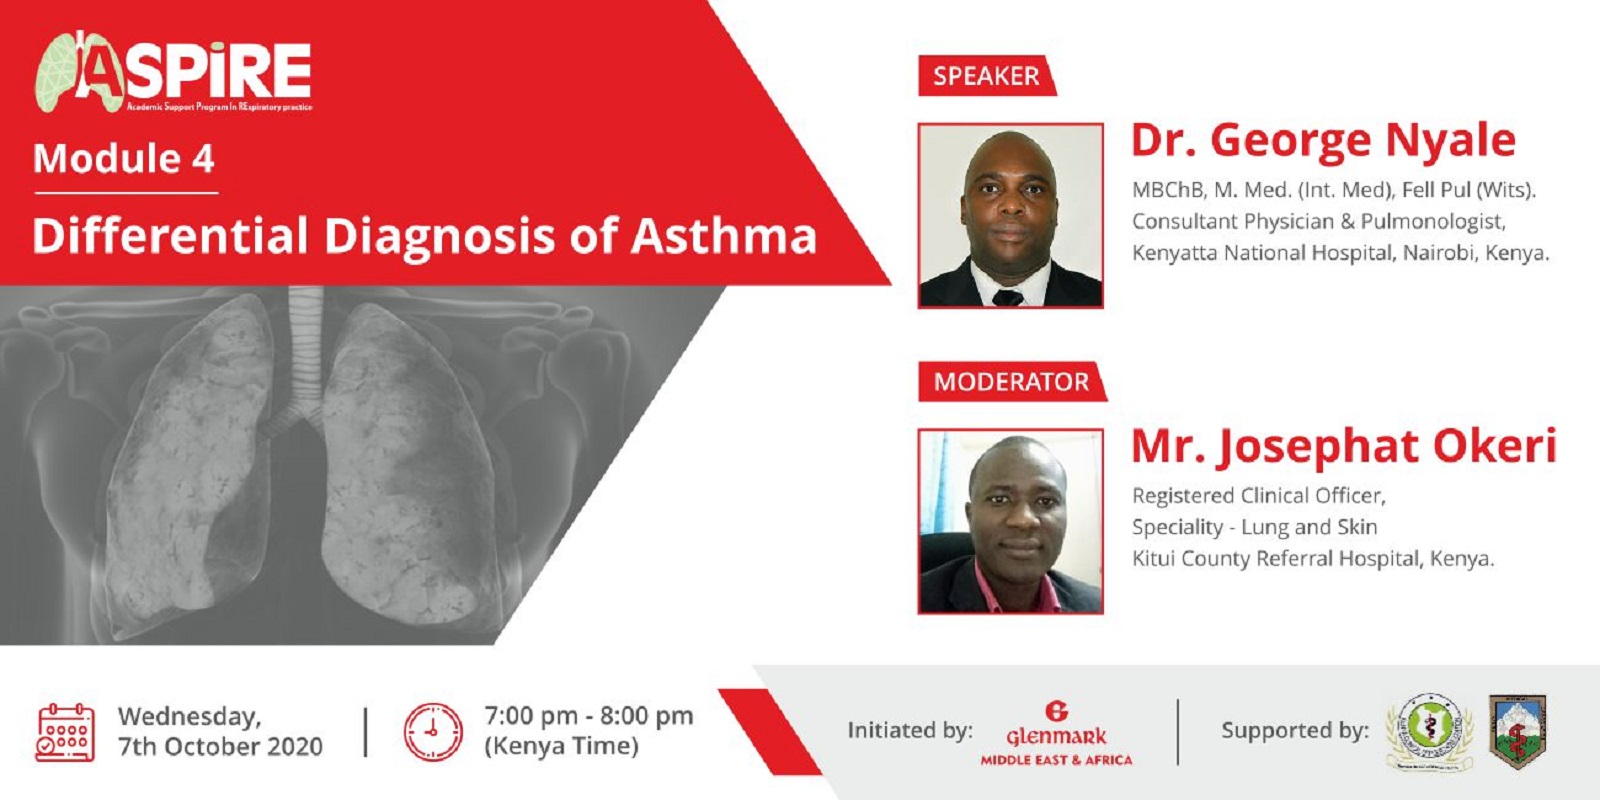 Differential diagnosis of asthma (Glenmark test)